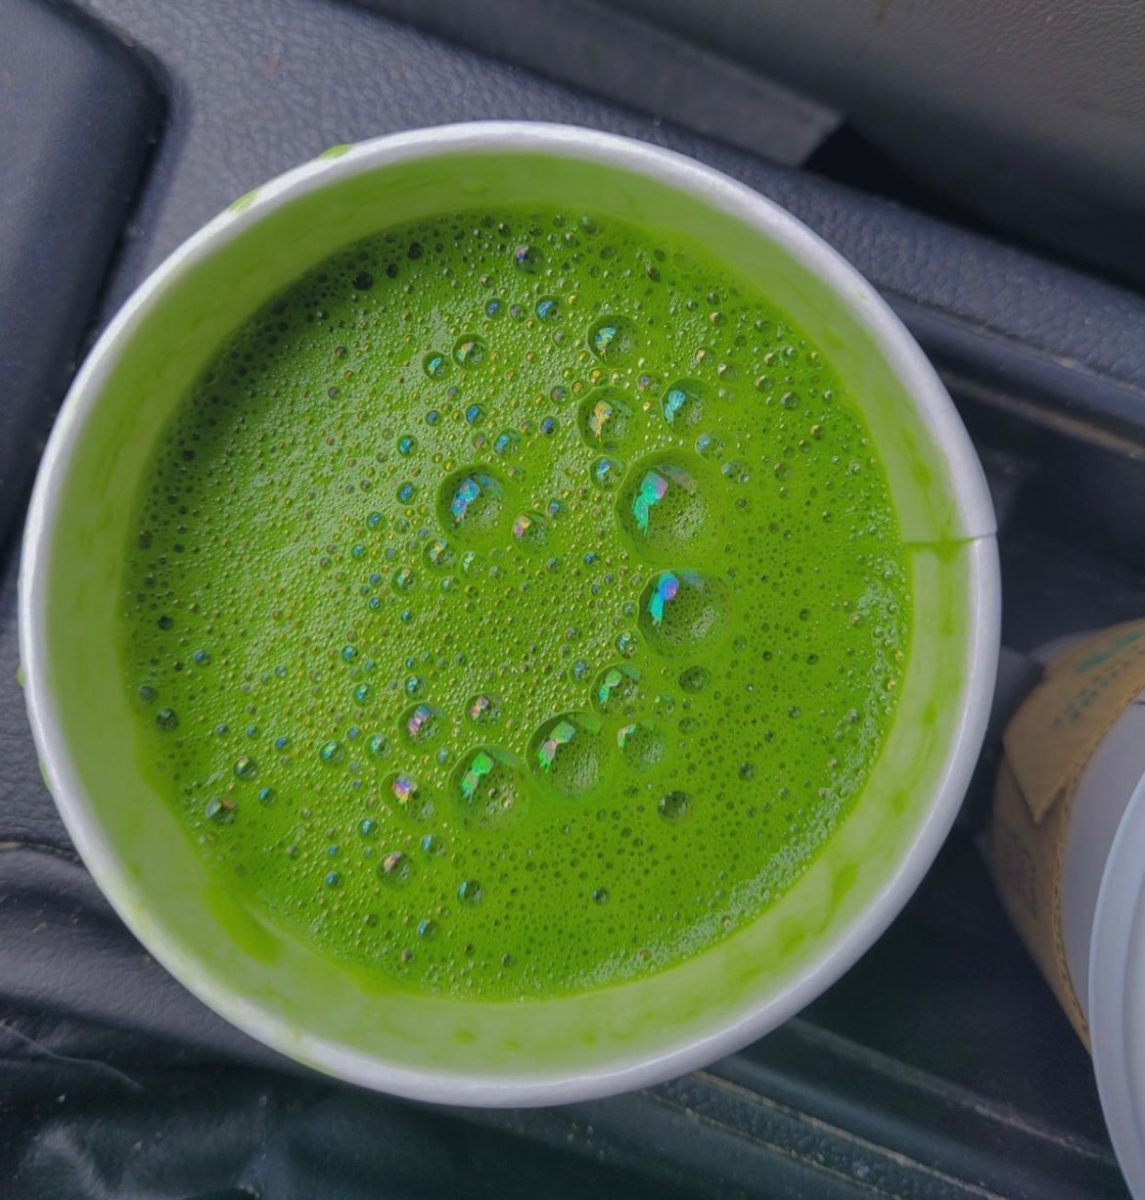 A student captures the essence of matcha. While caffine is good, it has immense impact.